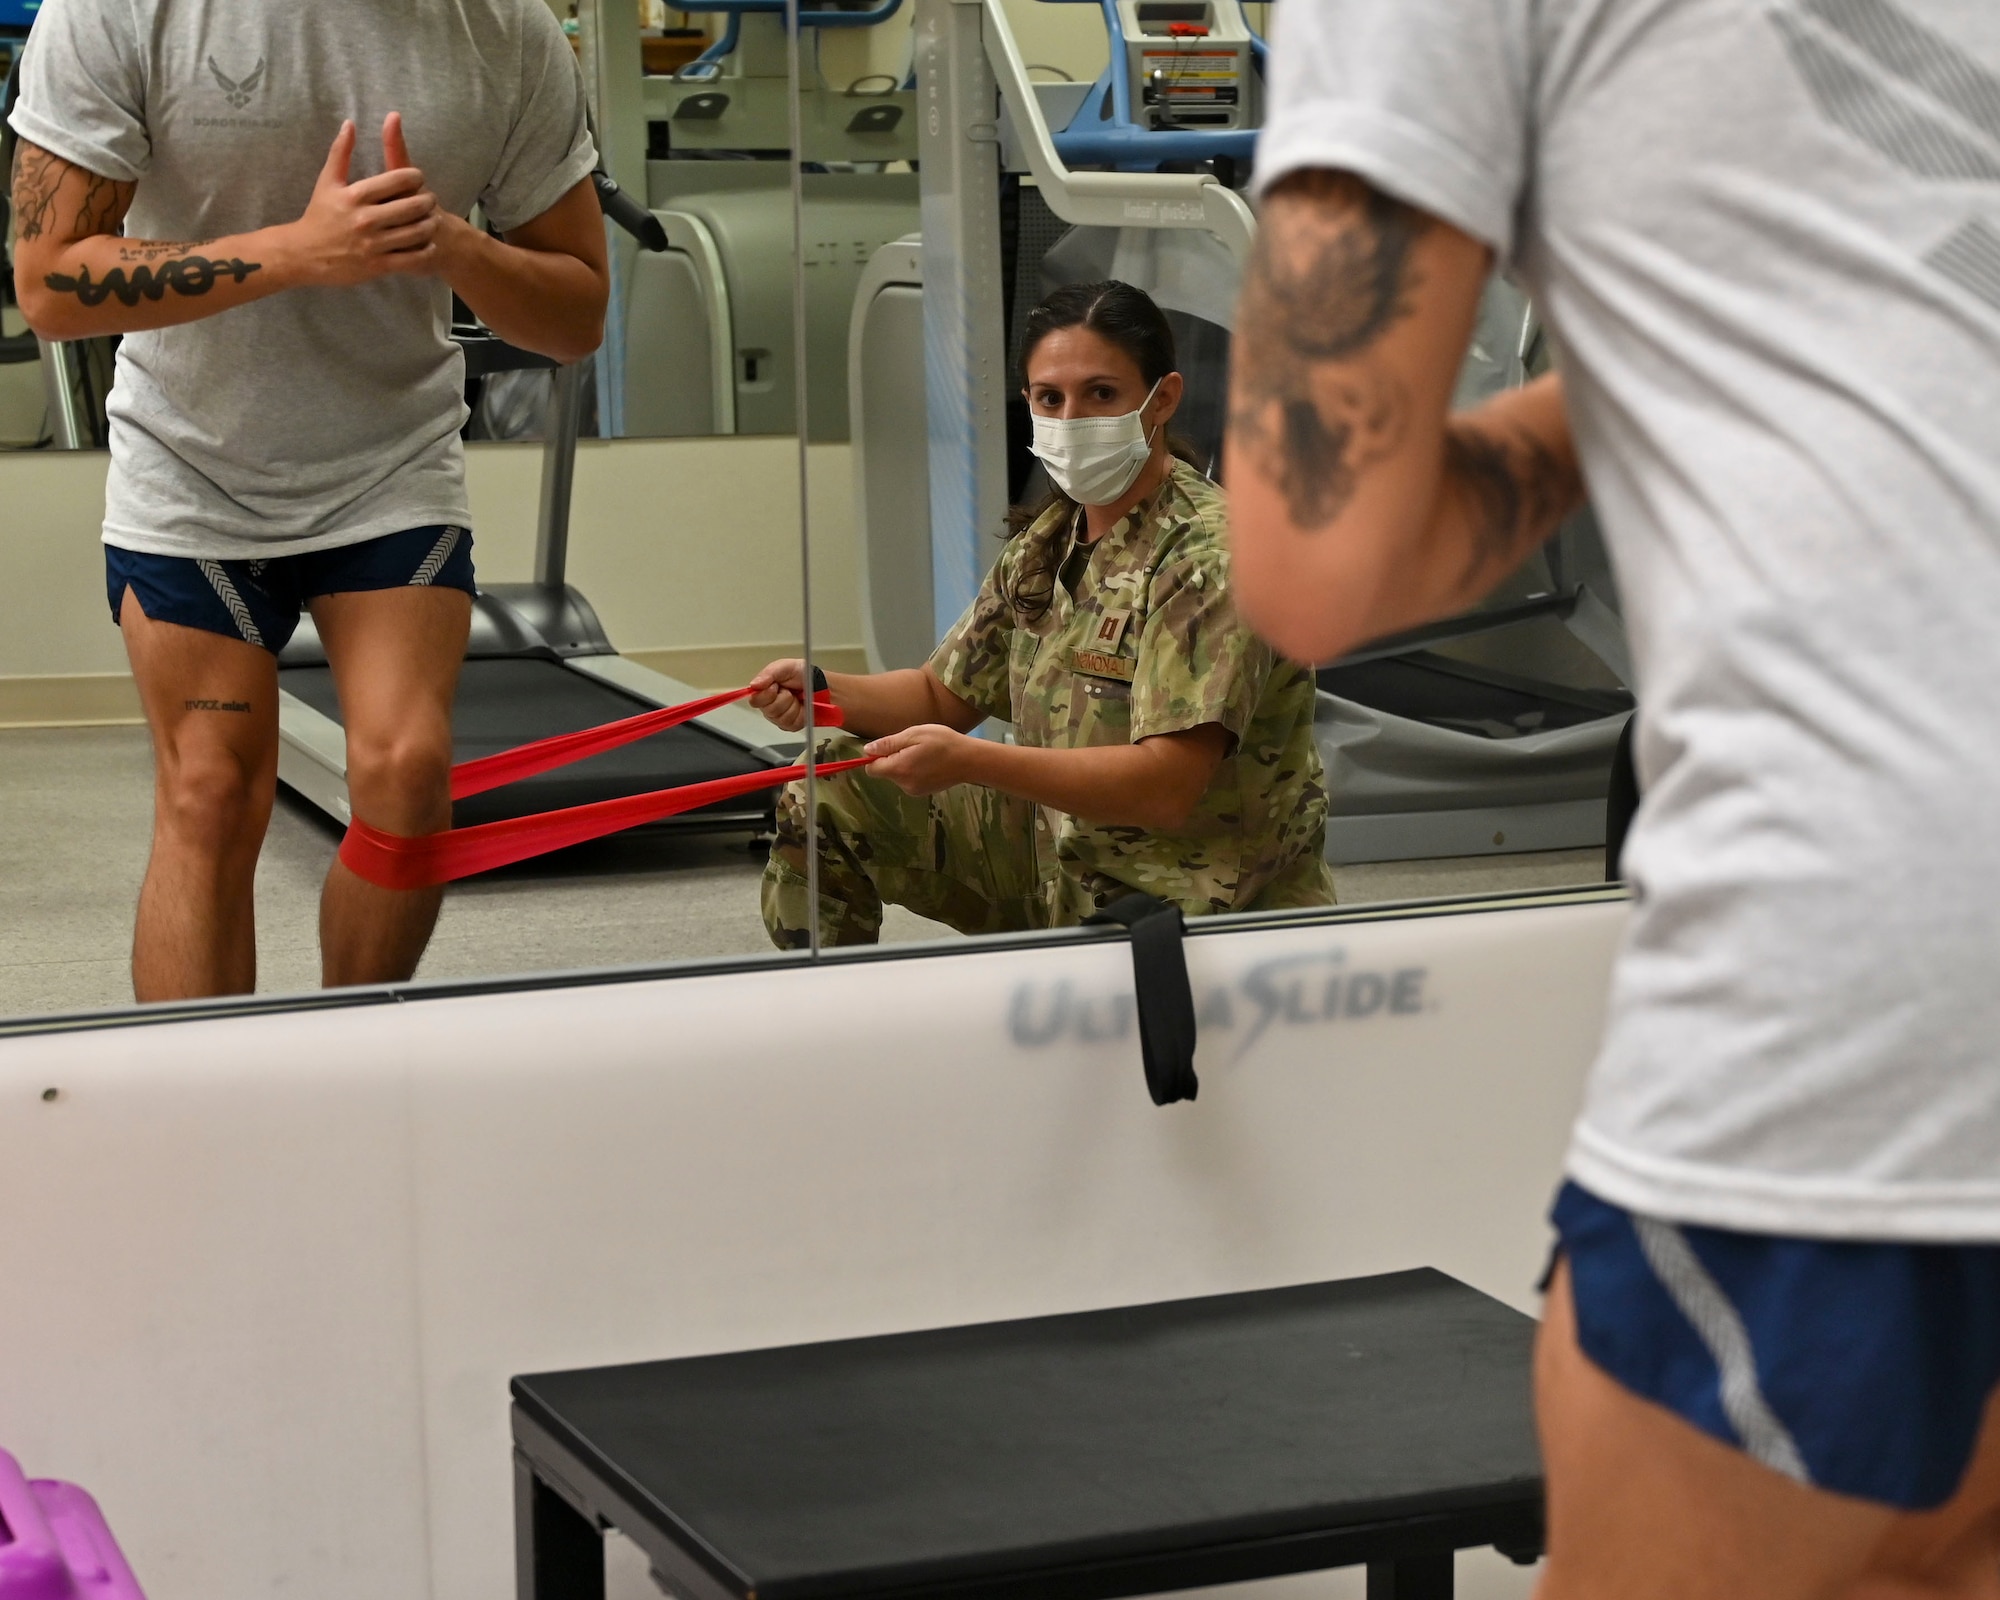 U.S. Air Force Capt. Meredith LaKomski, 36th Medical Group Physical Therapy Clinic element chief, holds a TheraBand during a lateral step down exercise with a patient at the PT Clinic on Andersen Air Force Base, Guam, Sept. 7, 2022. Physical therapists are trained on the intricate movements of the body and have the knowledge to teach others preventative resources to stop injuries from occurring. (U.S. Air Force photo by Airman 1st Class Lauren Clevenger)